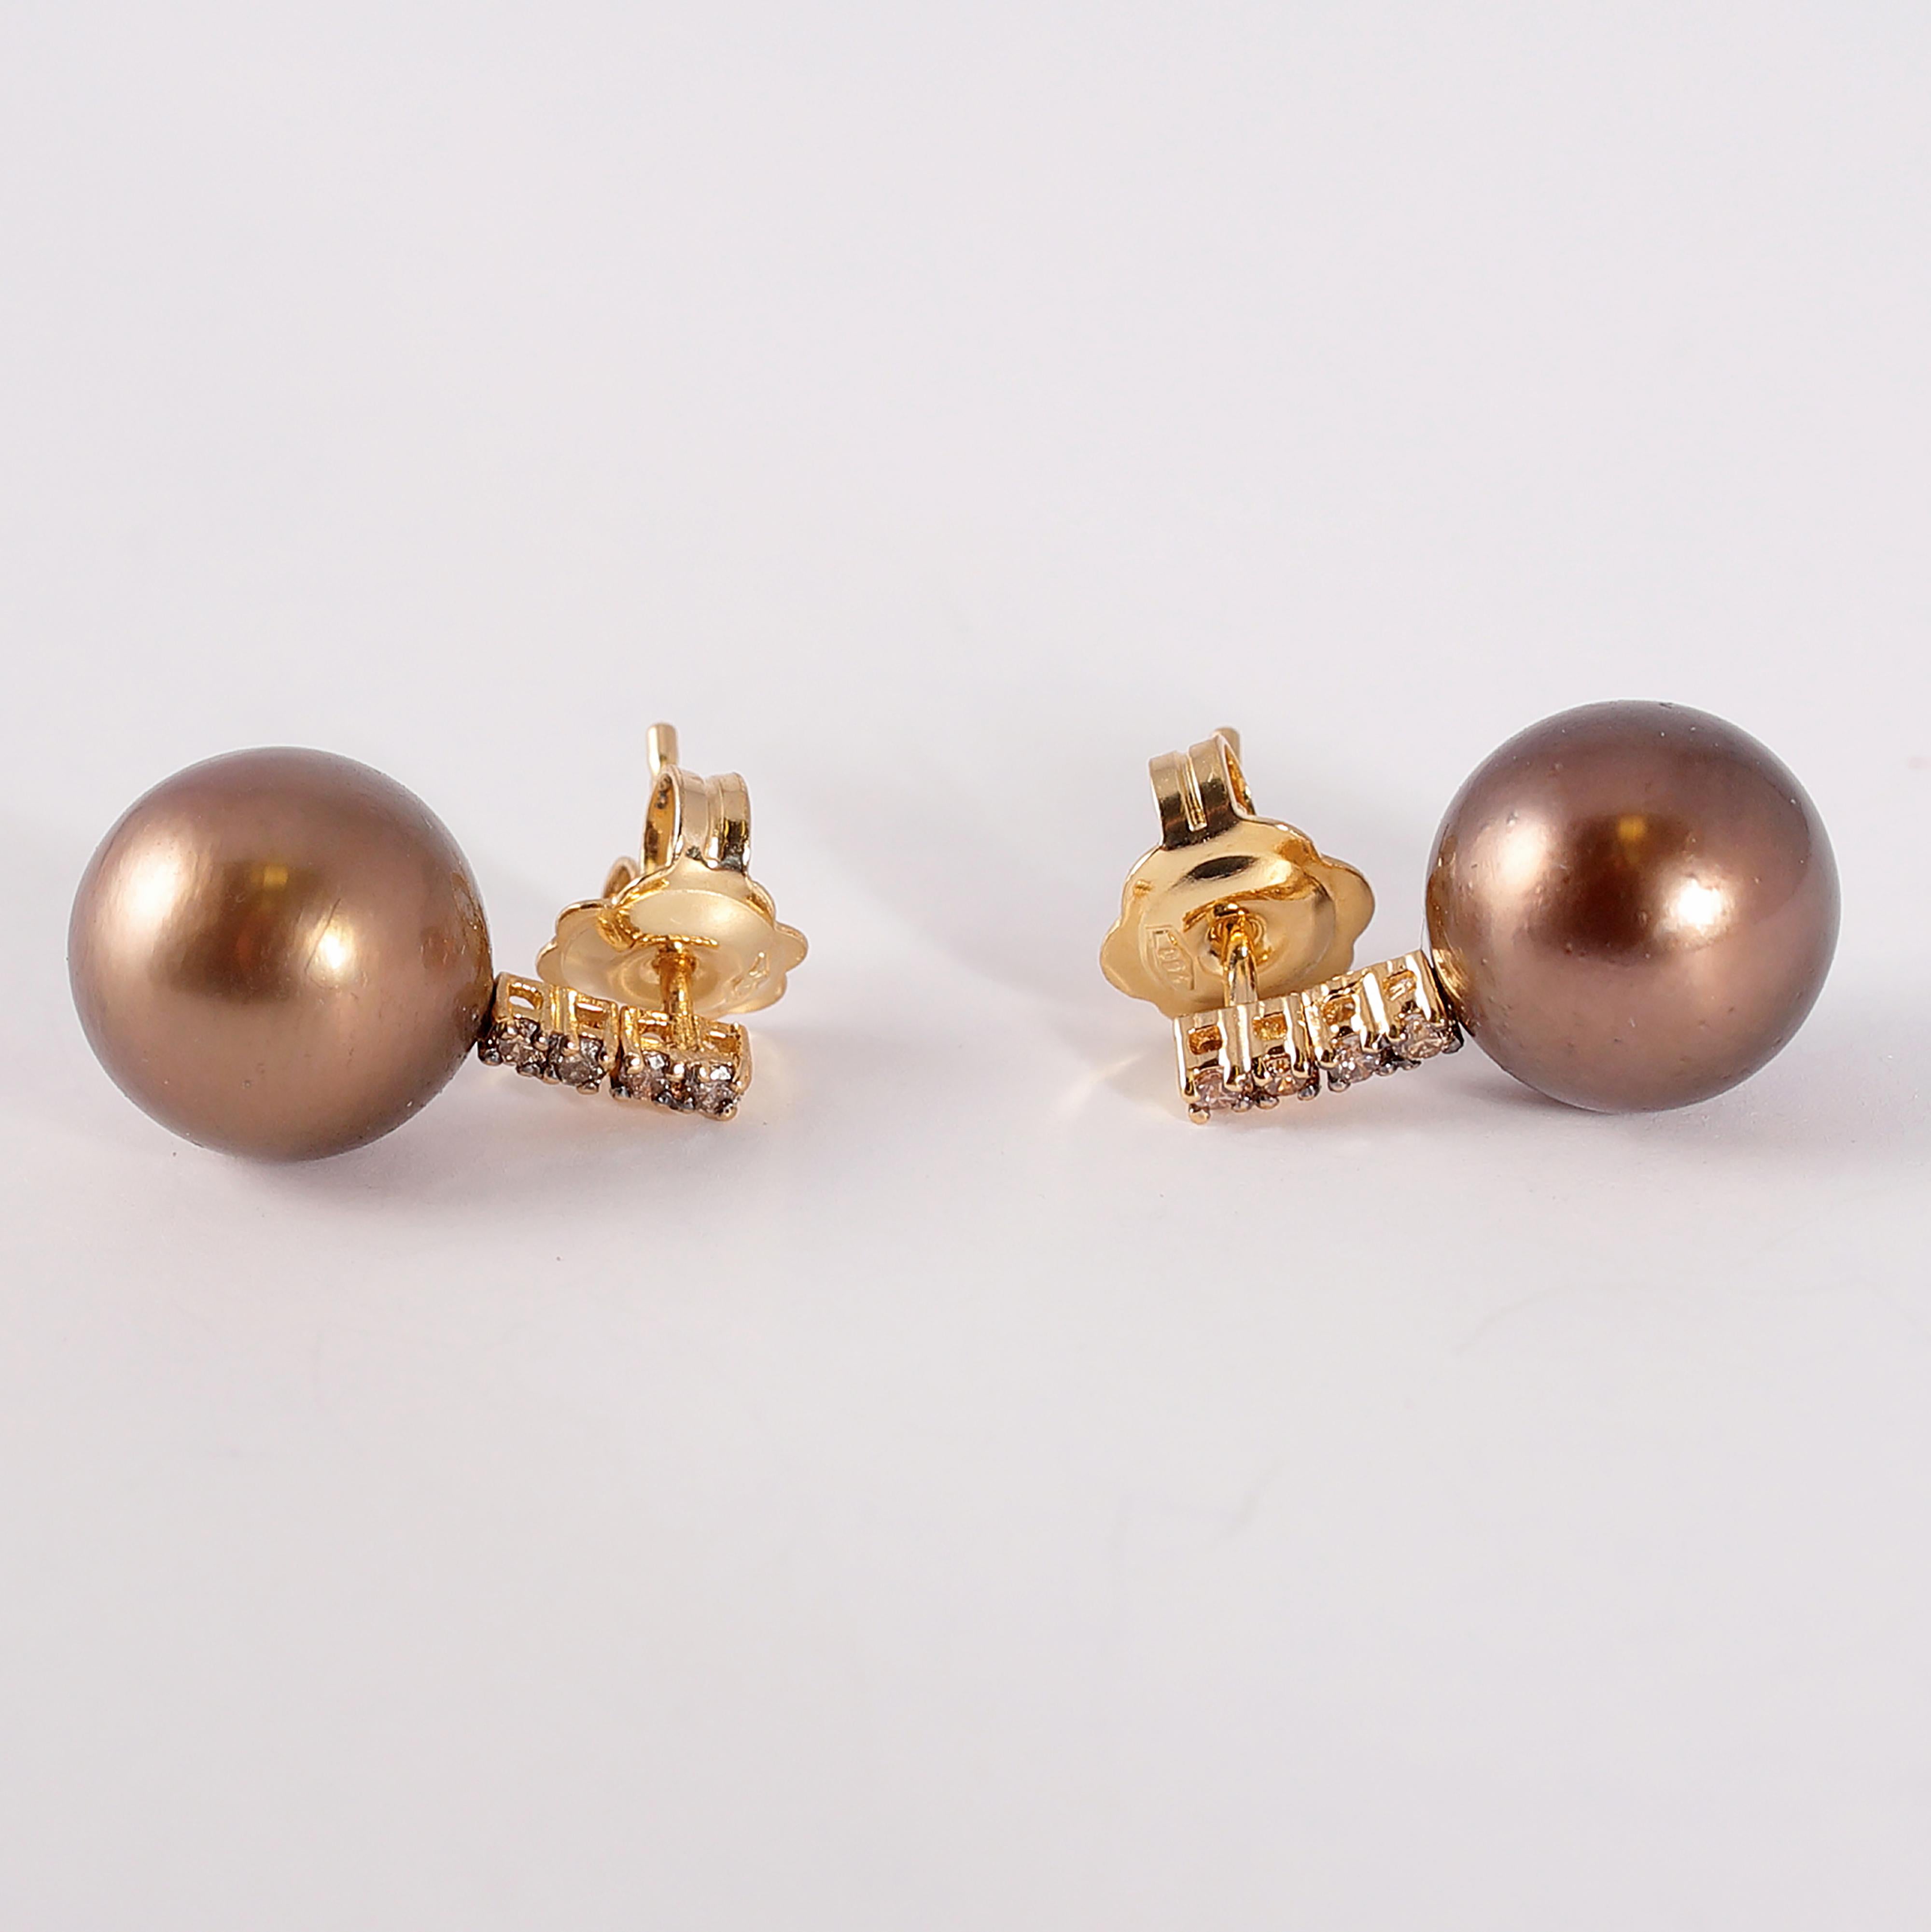 These pearls run the gamut of brown colors!  The 18 karat yellow gold mountings are the perfect backdrop for the 10.00 mm Tahitian pearls and the 0.15 carats of brown diamonds.  They are secured with a standard friction back. 
